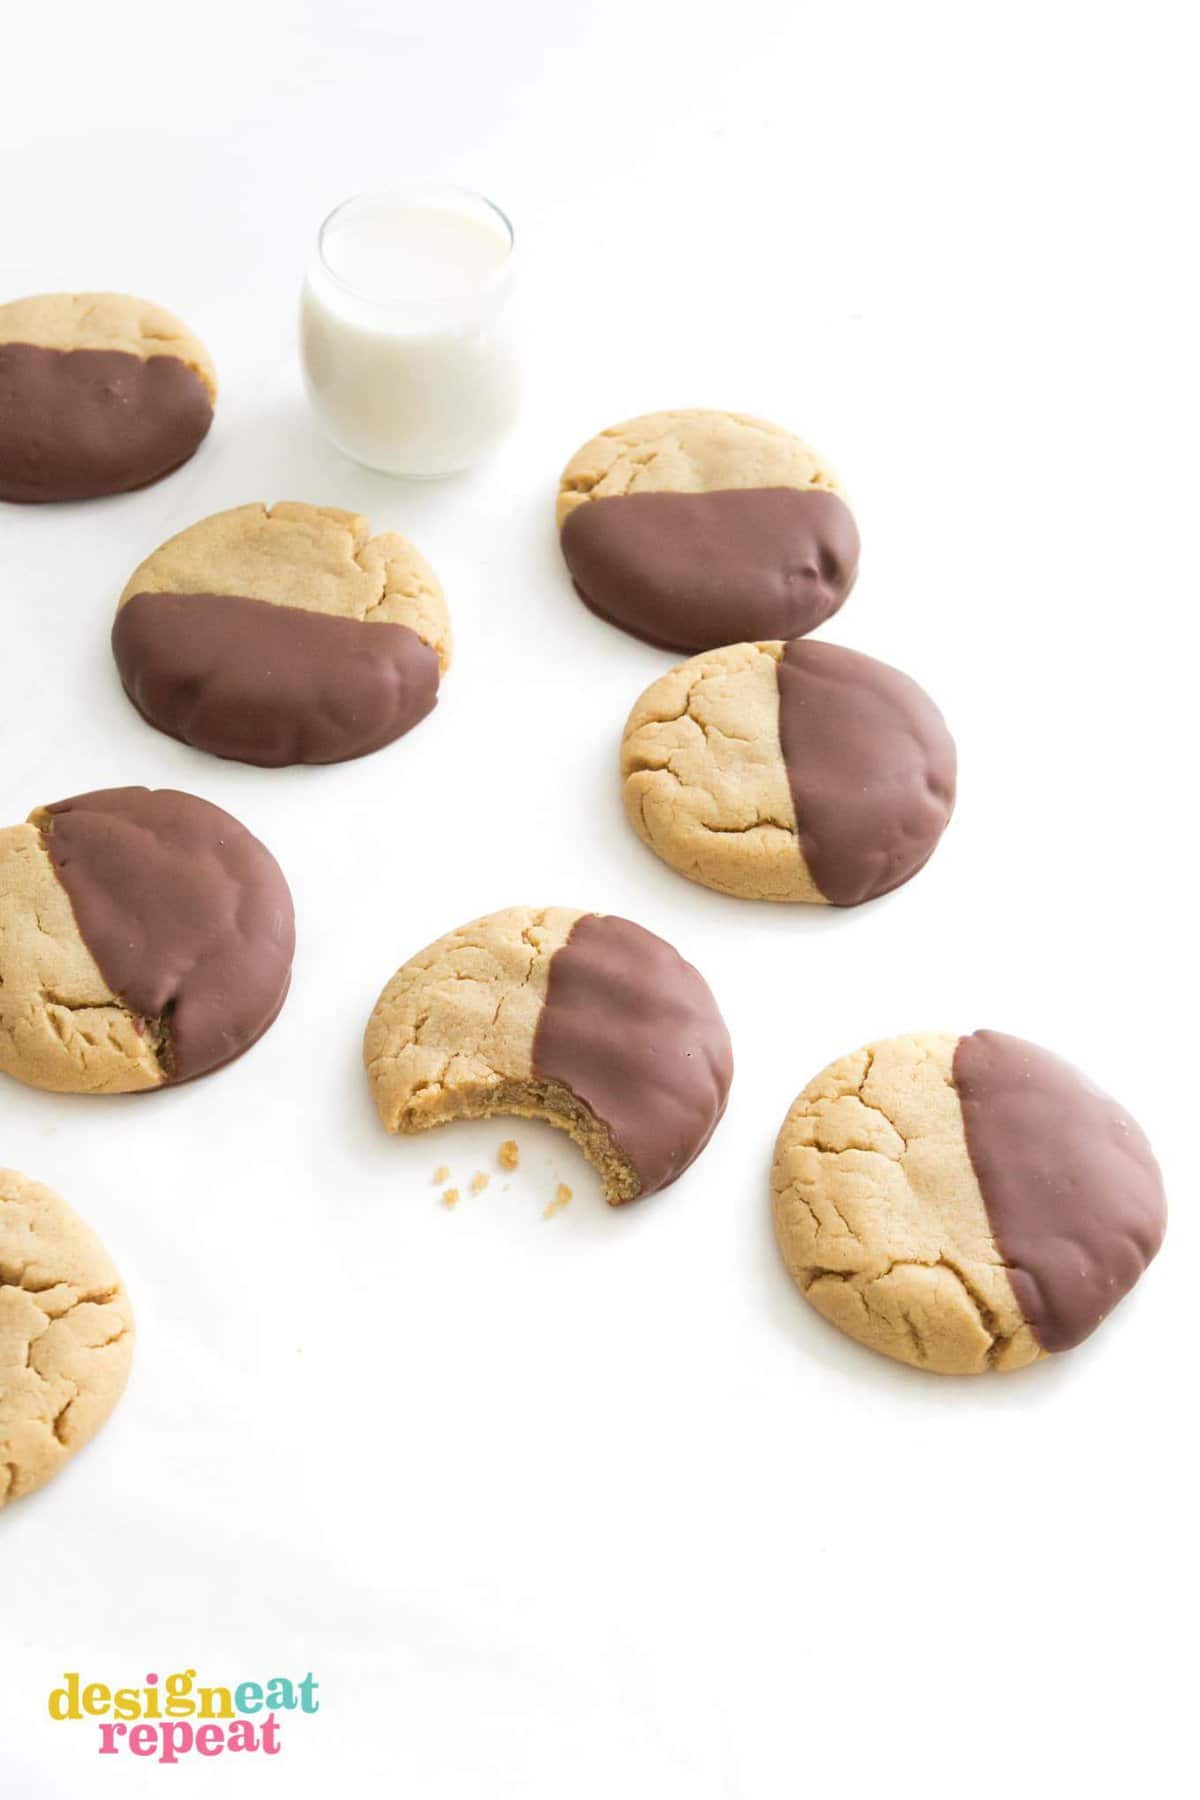 Table of peanut butter cookies dipped in chocolate with bite and glass of milk.